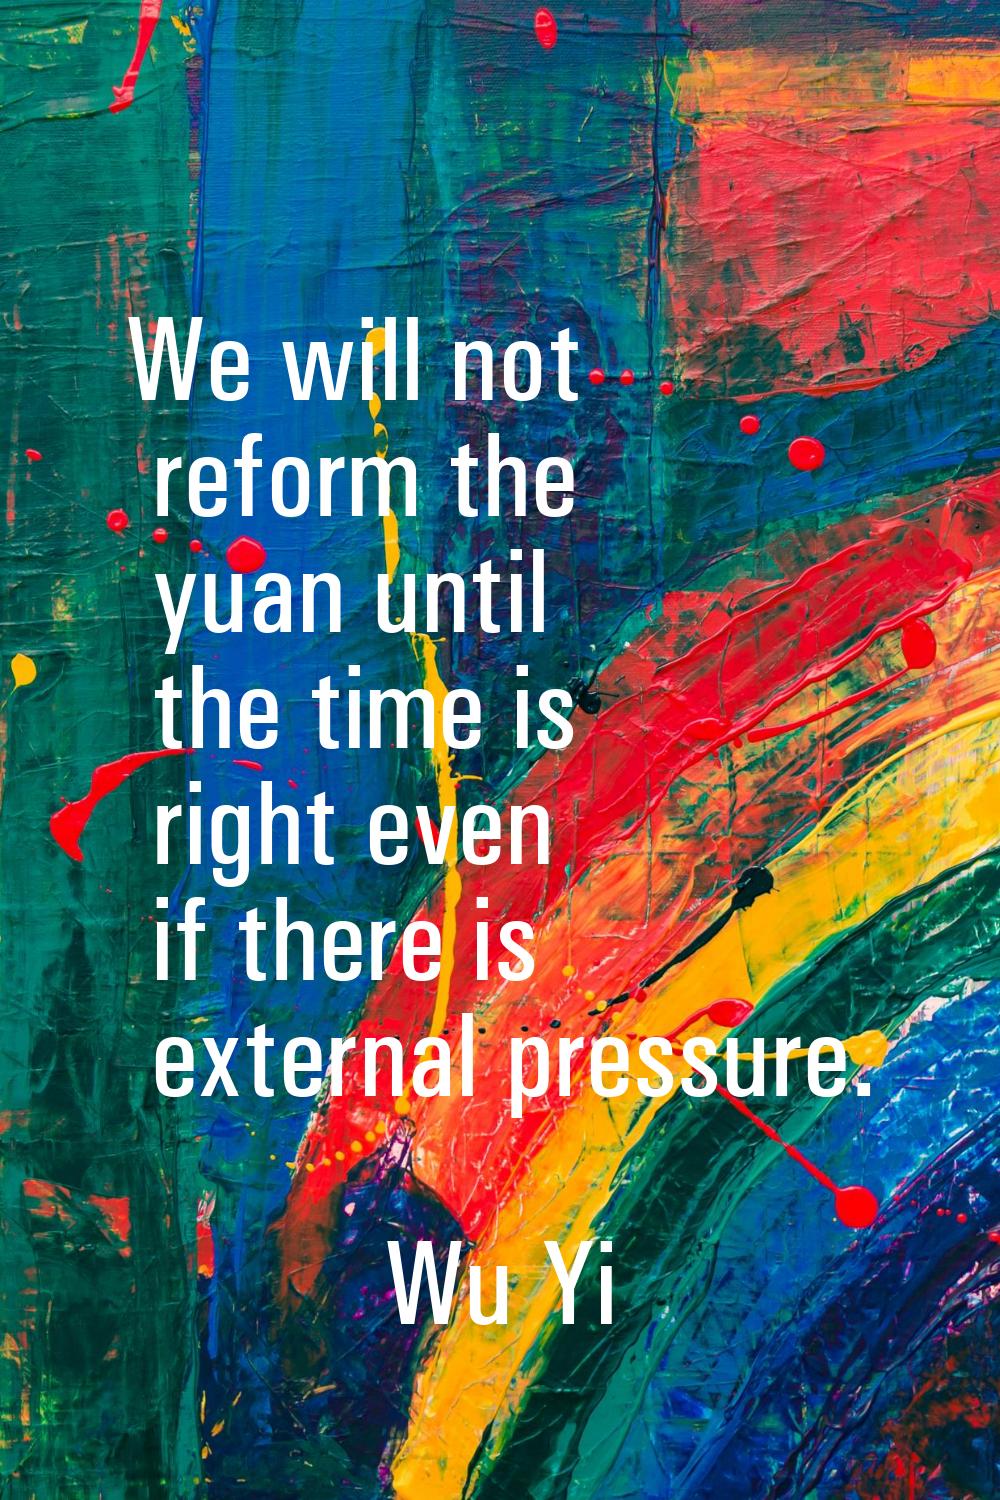 We will not reform the yuan until the time is right even if there is external pressure.